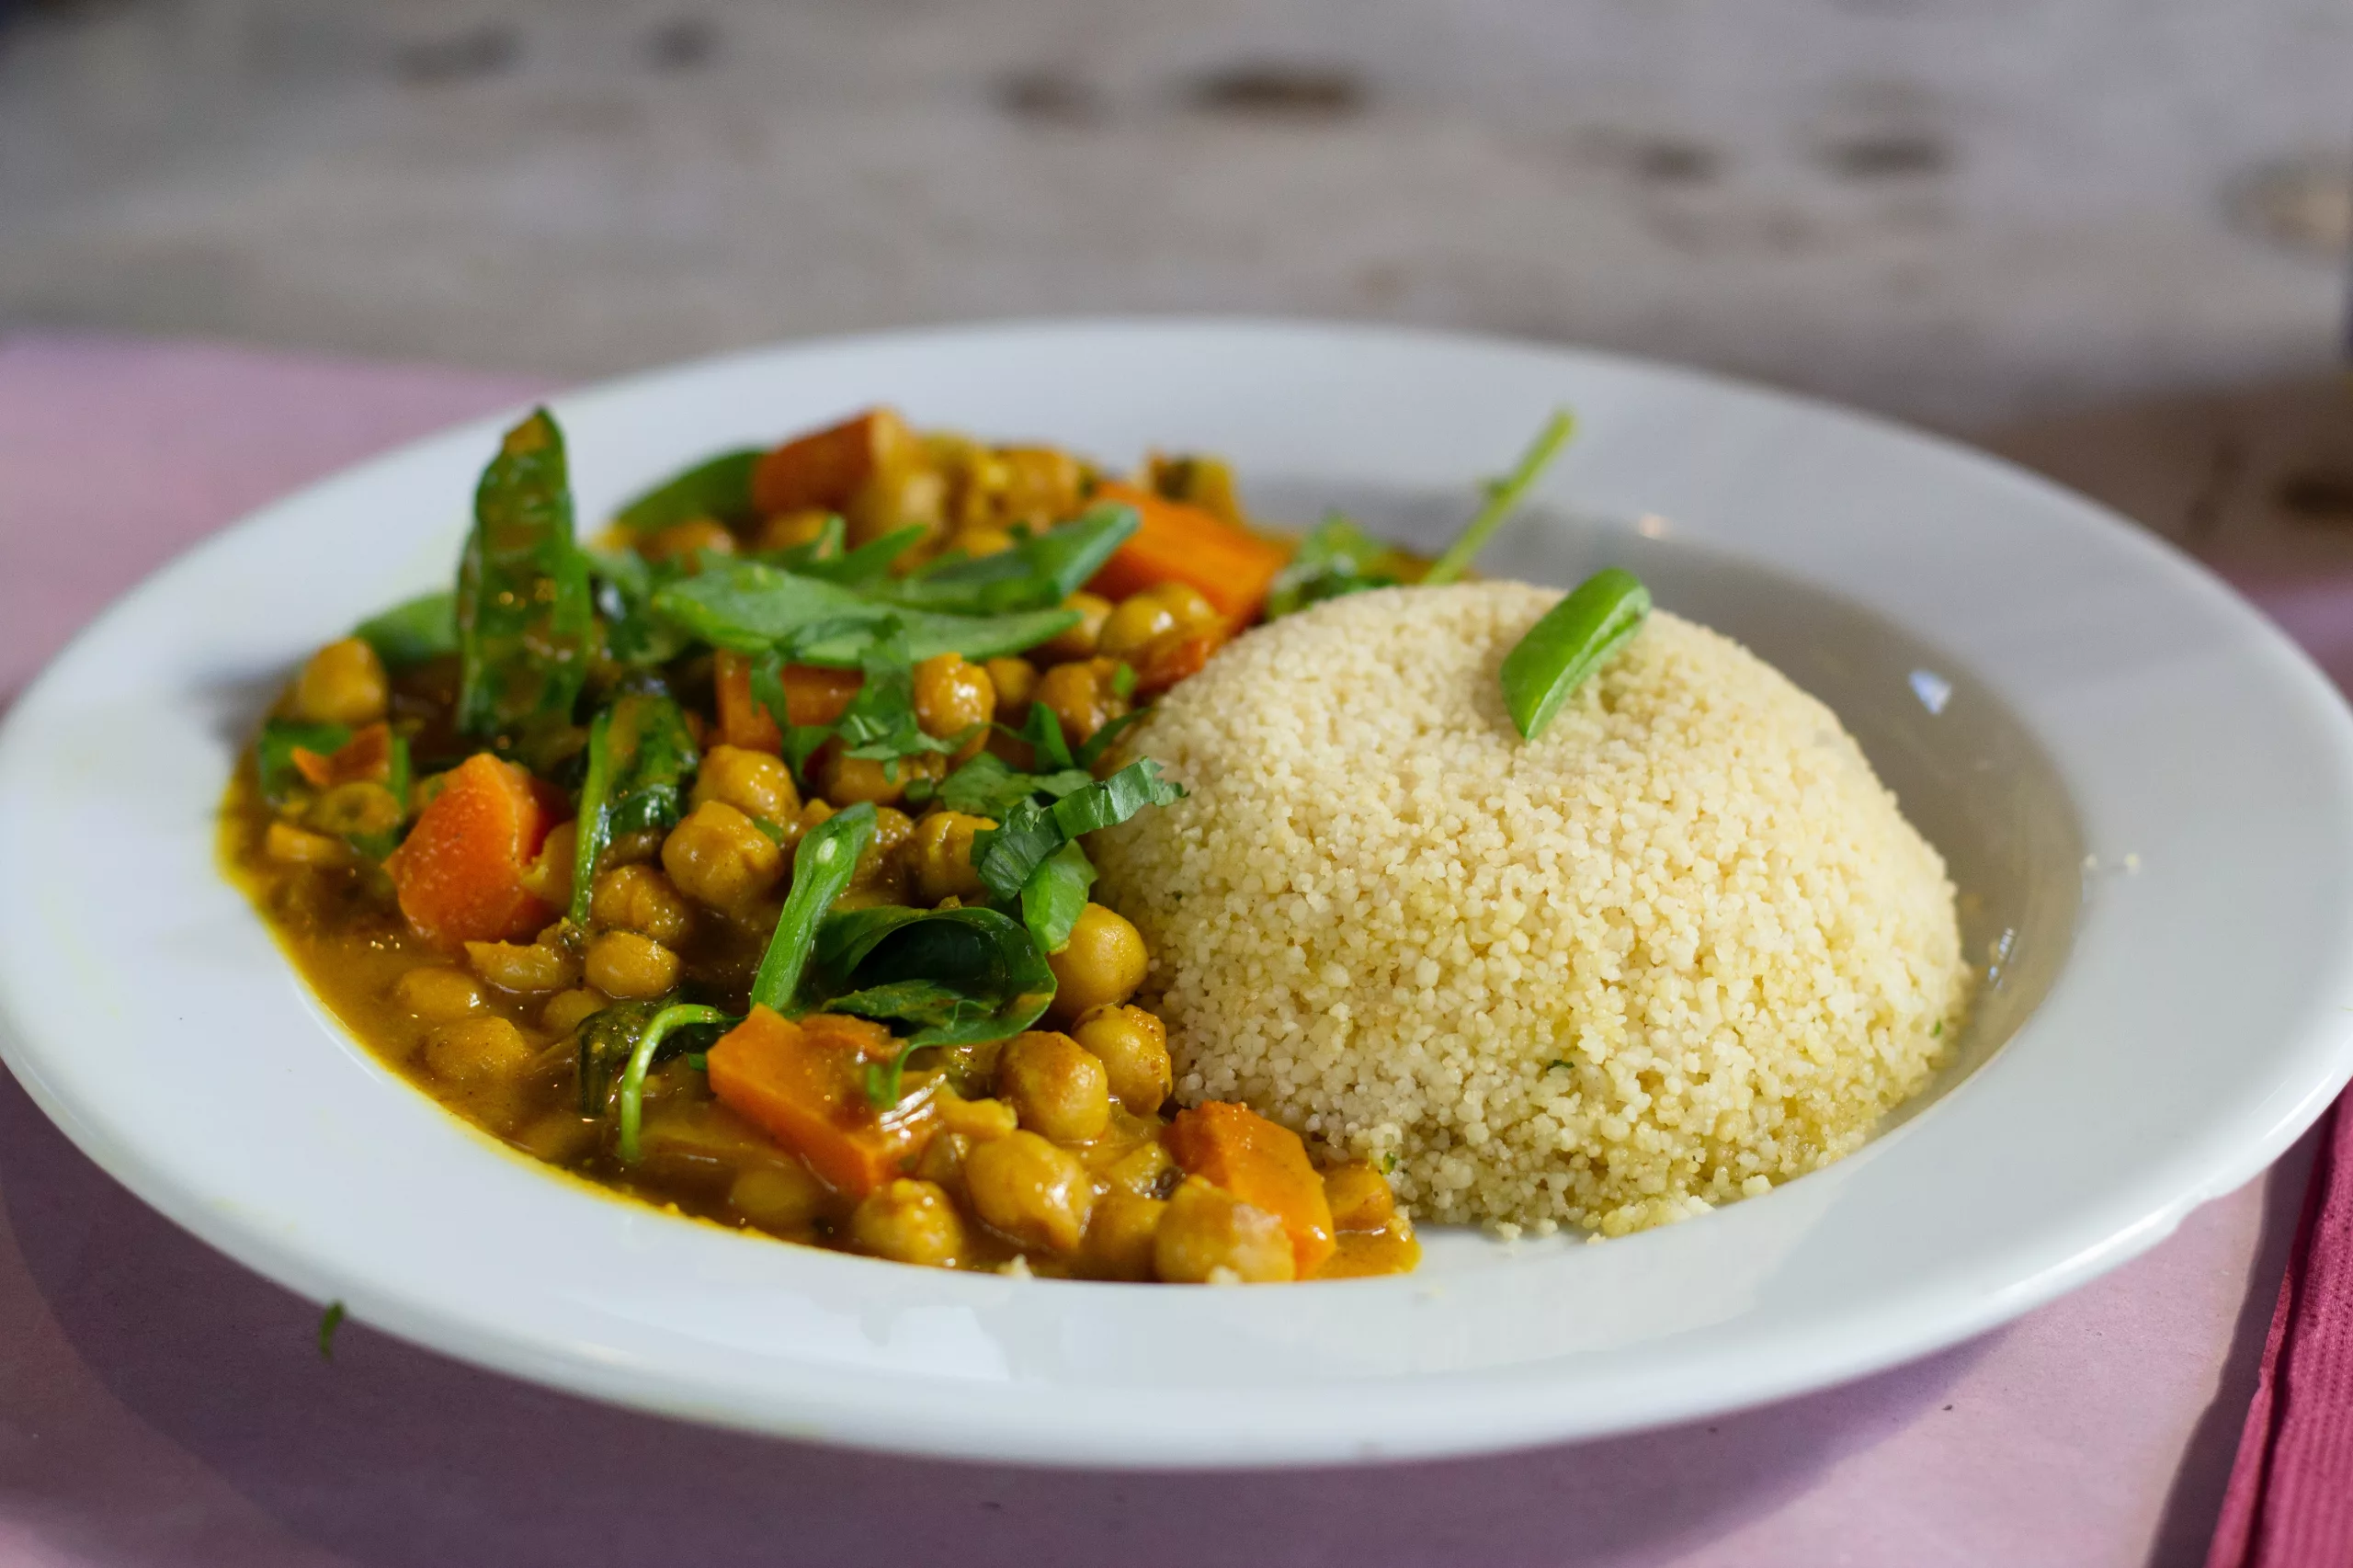 Chickpea and lentil curry is a great way to include plant-based protein in your diet.